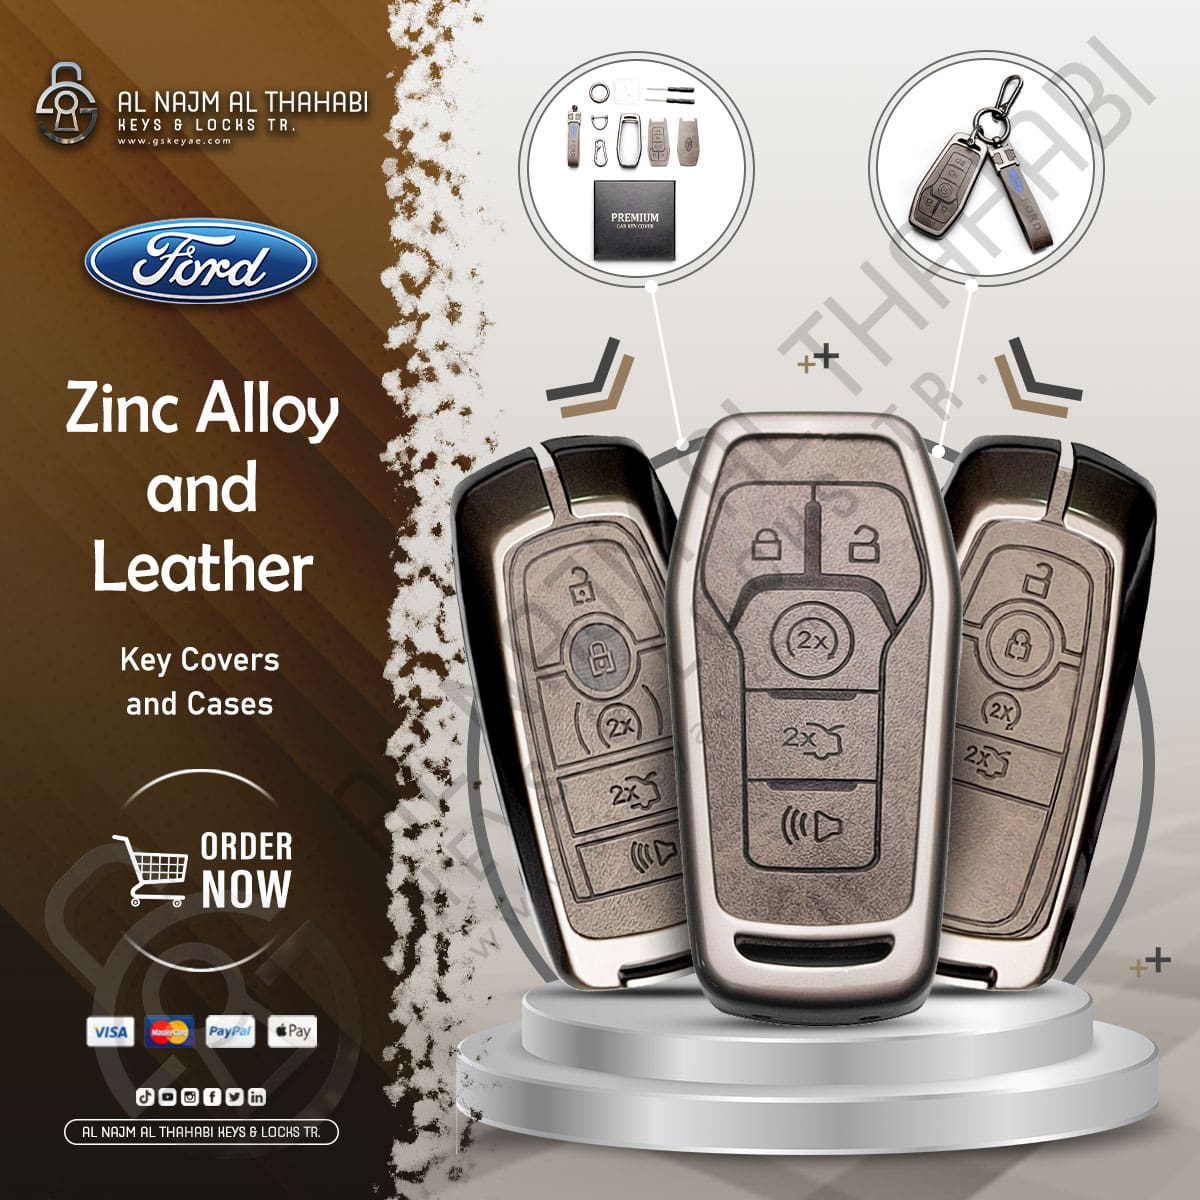 Zinc Alloy and Leather Key Cover Case for Ford